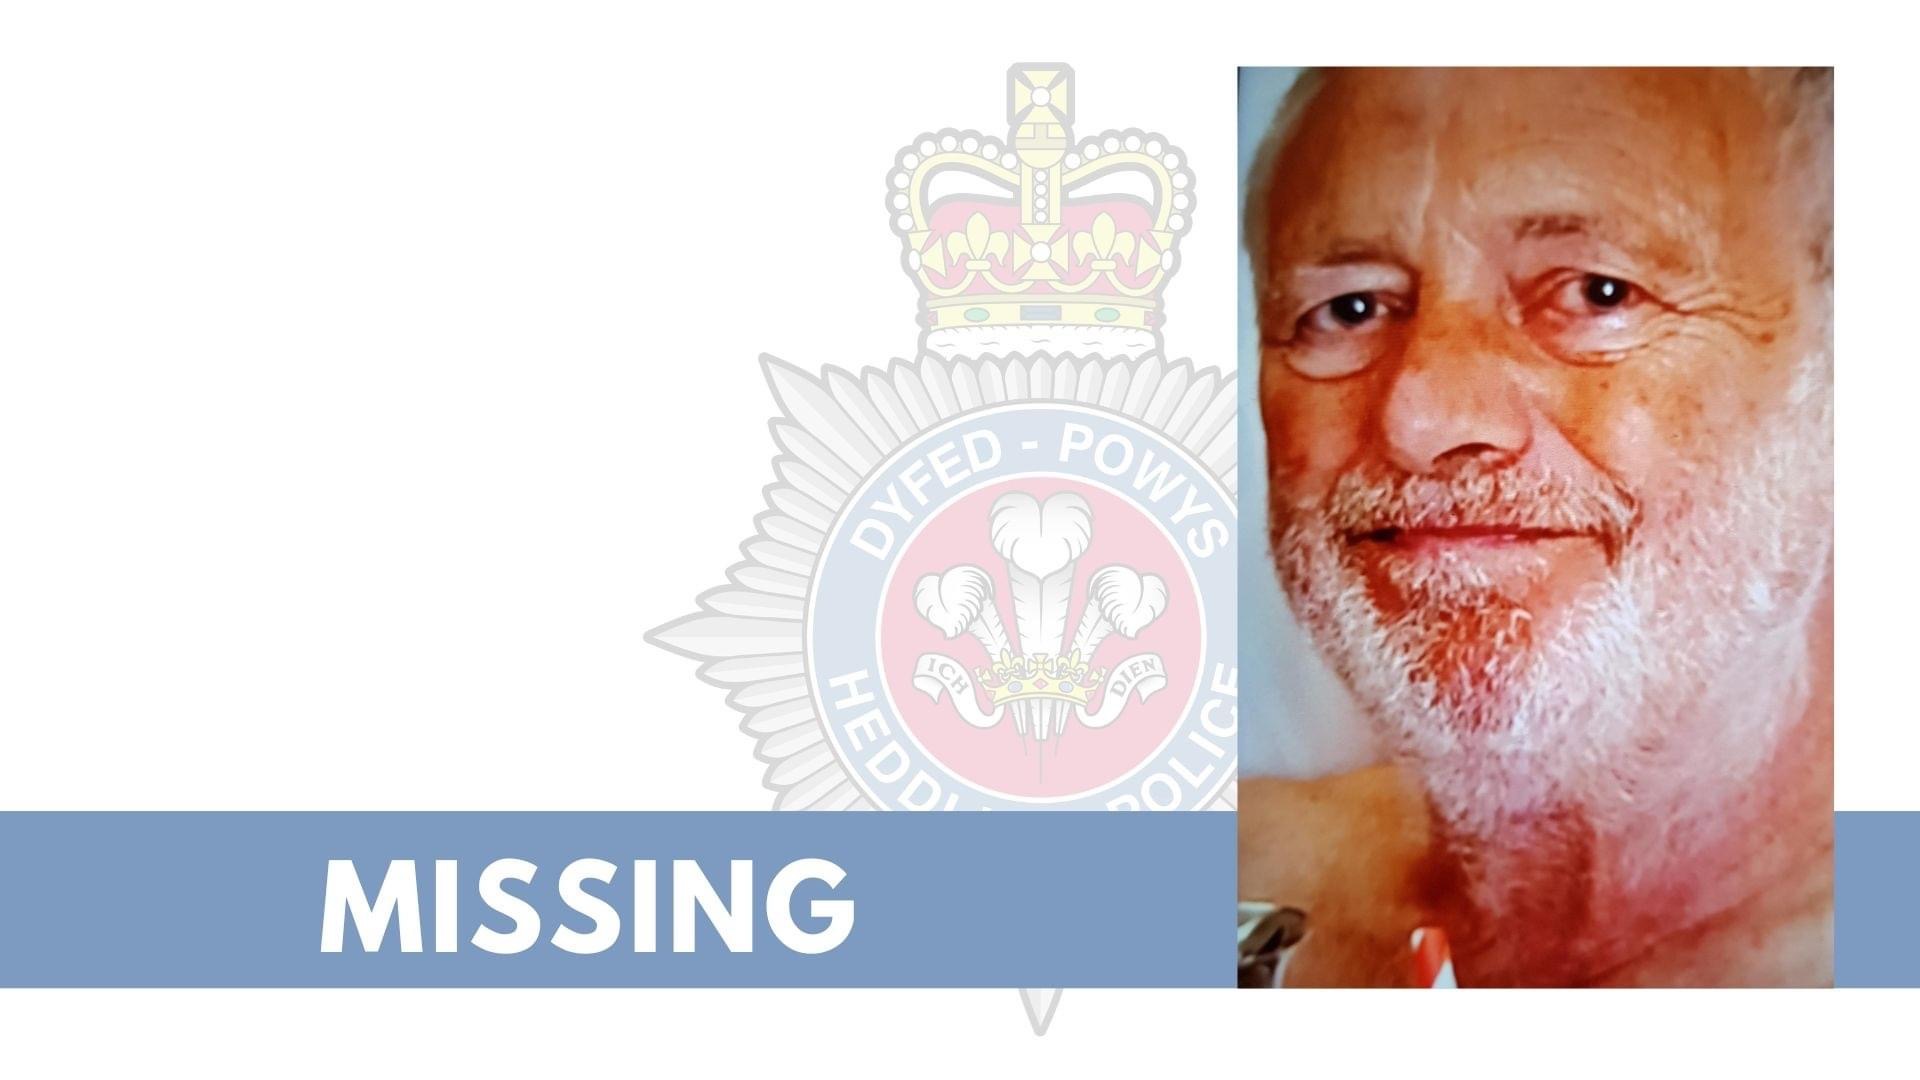 NEWS | Police launch appeal to help find missing 71-year-old from Hay-on-Wye